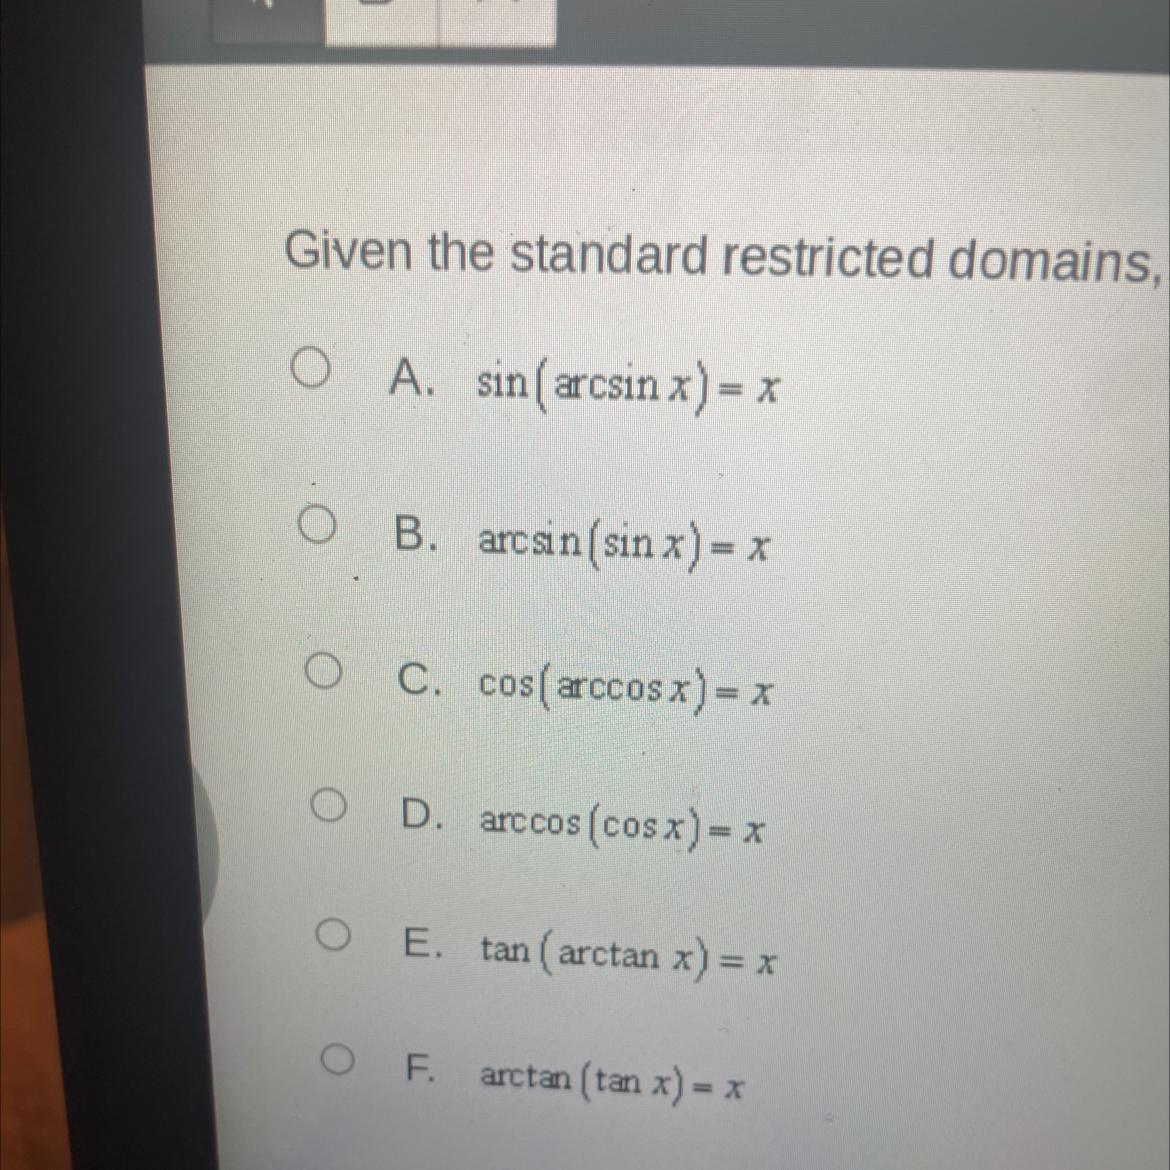 Given The Standard Restricted Domains, Which Of The Following Relationships Does Not Hold For X=-1? (Assume